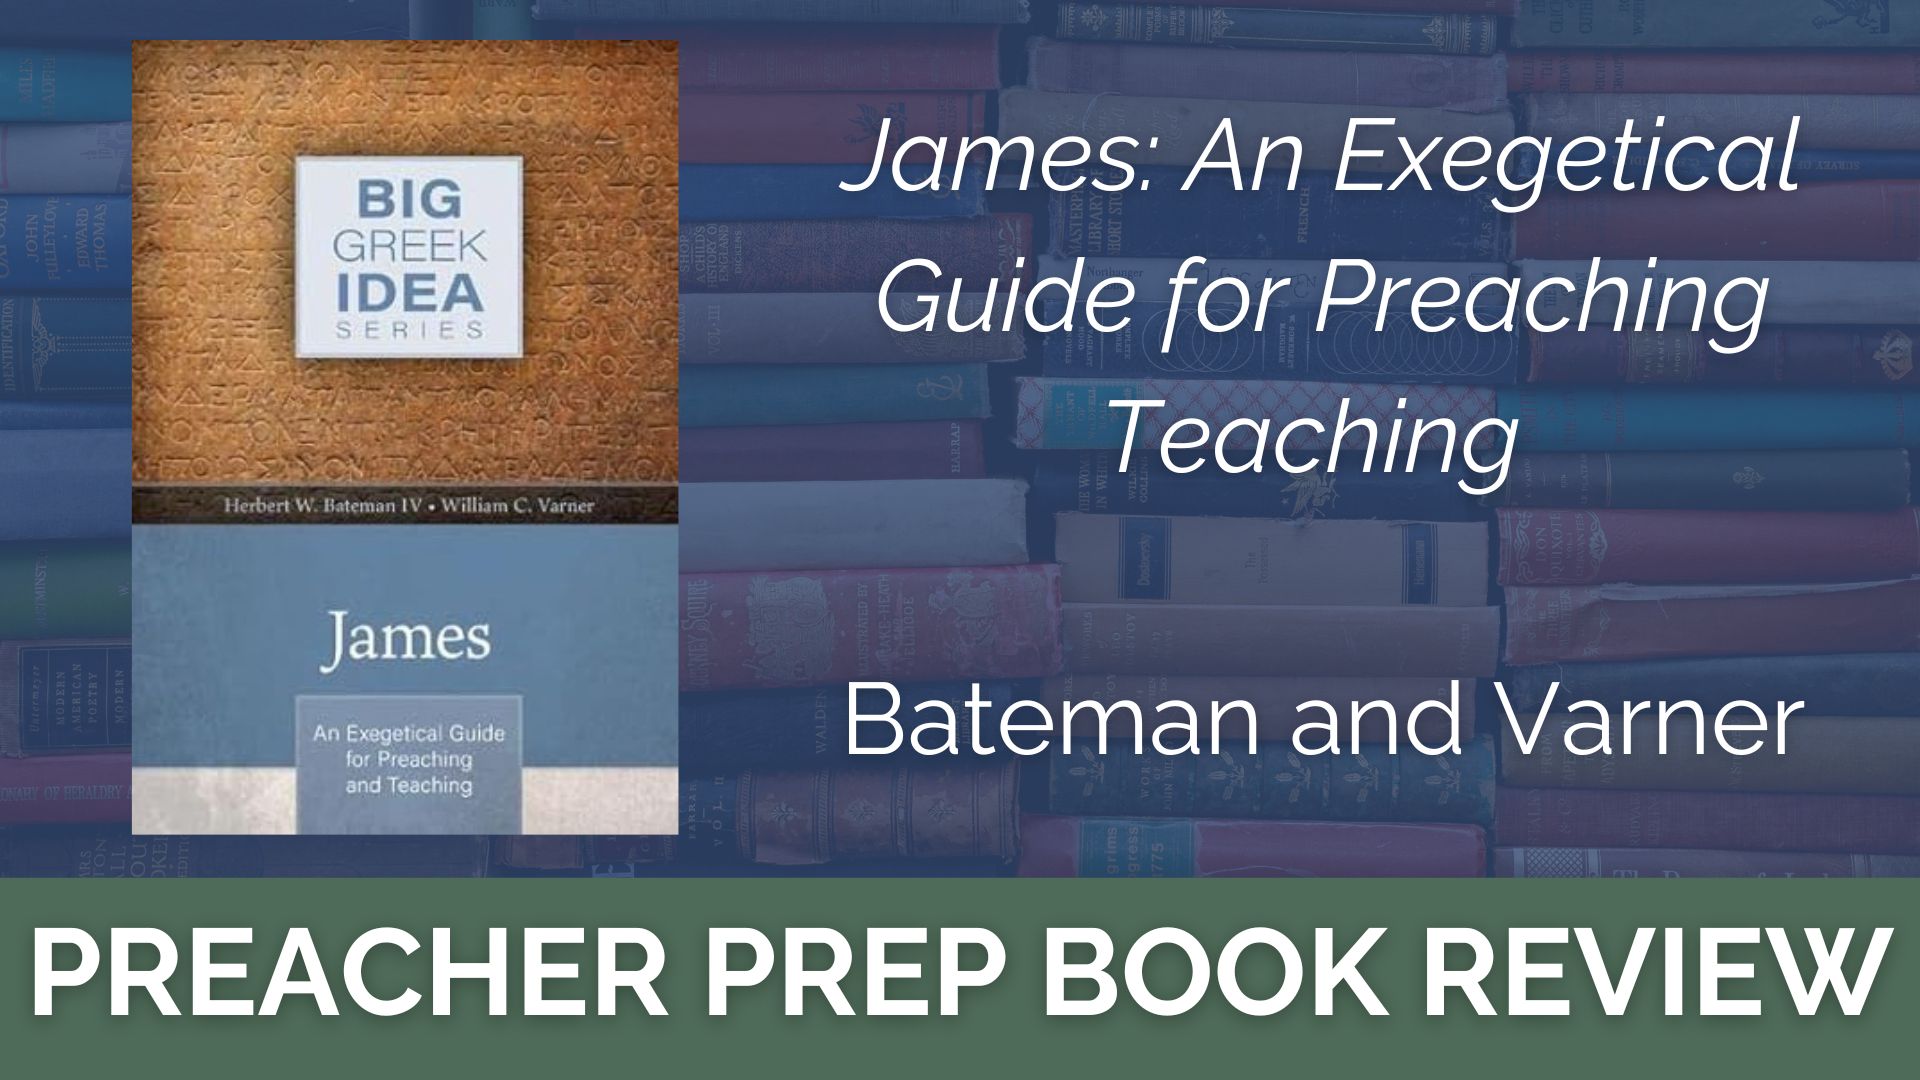 James: An Exegetical Guide for Preaching and Teaching | Preacher Prep Book Review